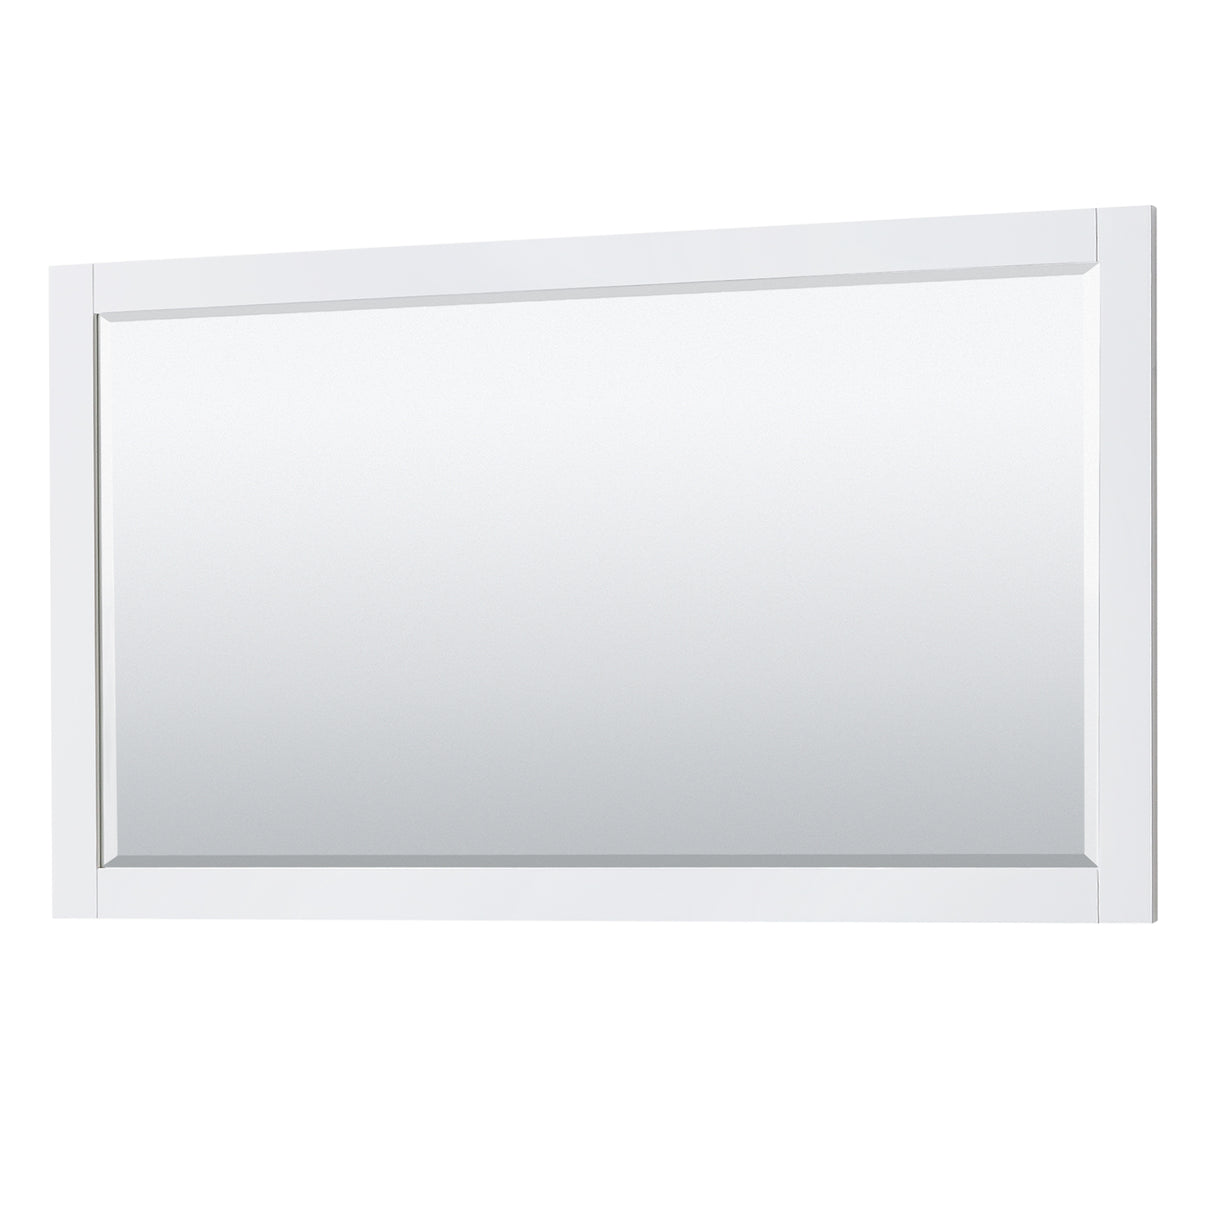 Avery 60 Inch Single Bathroom Vanity in White White Carrara Marble Countertop Undermount Square Sink 58 Inch Mirror Brushed Gold Trim